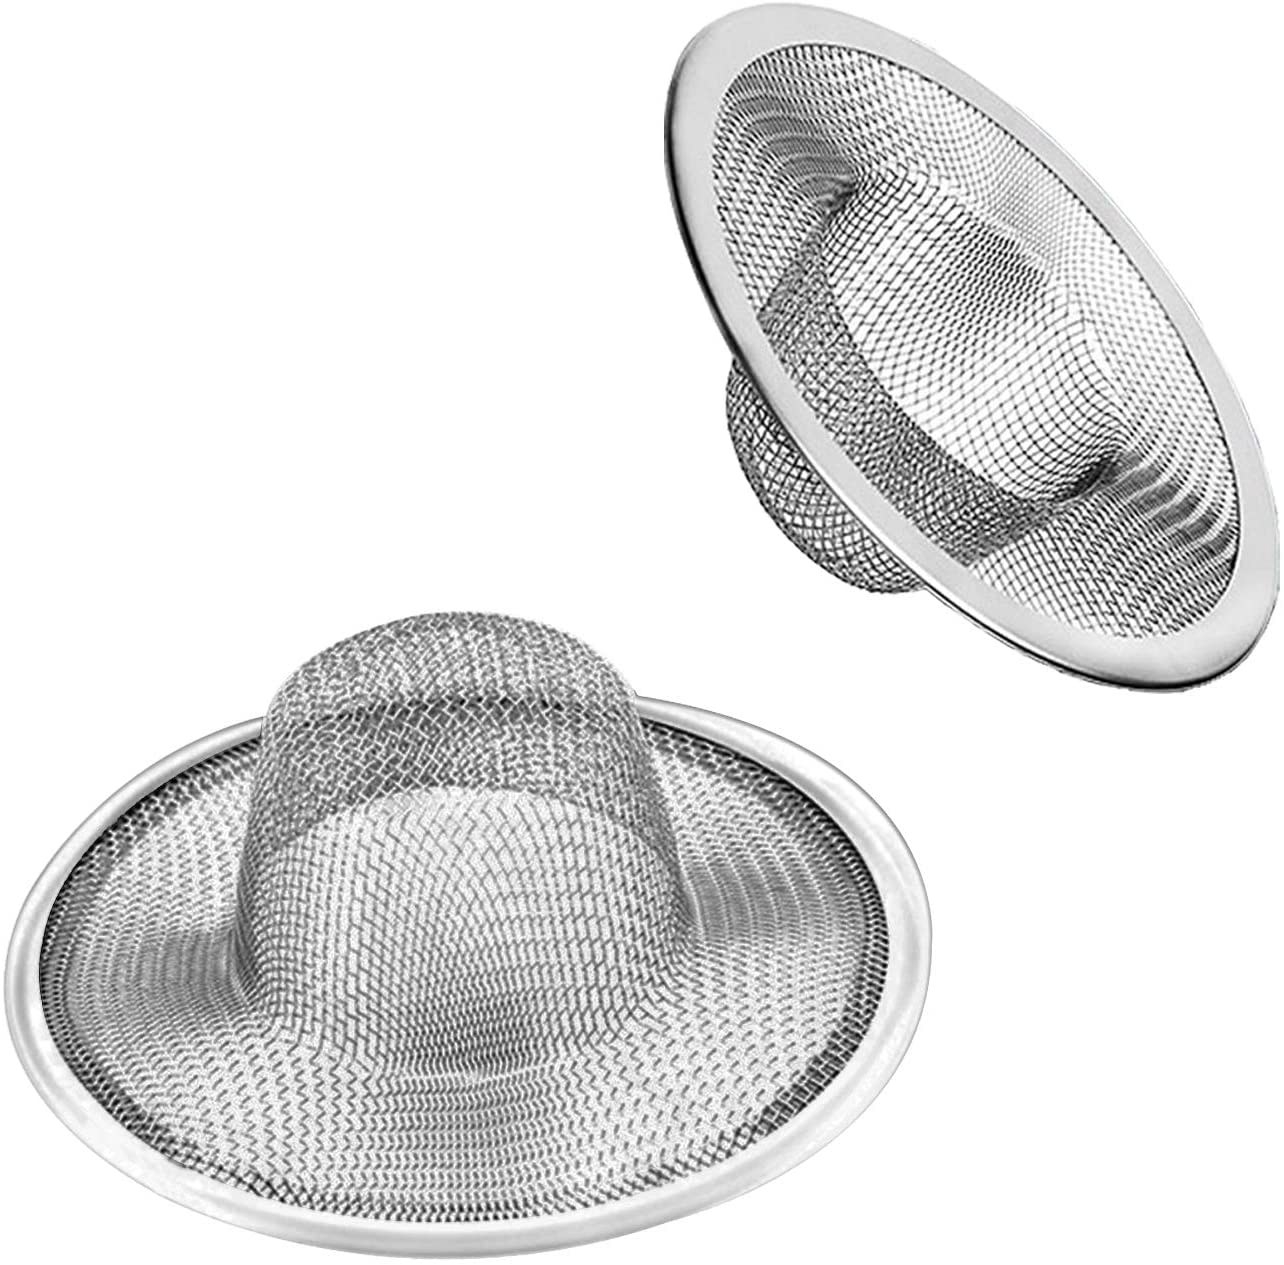 two strainer drains on a white background